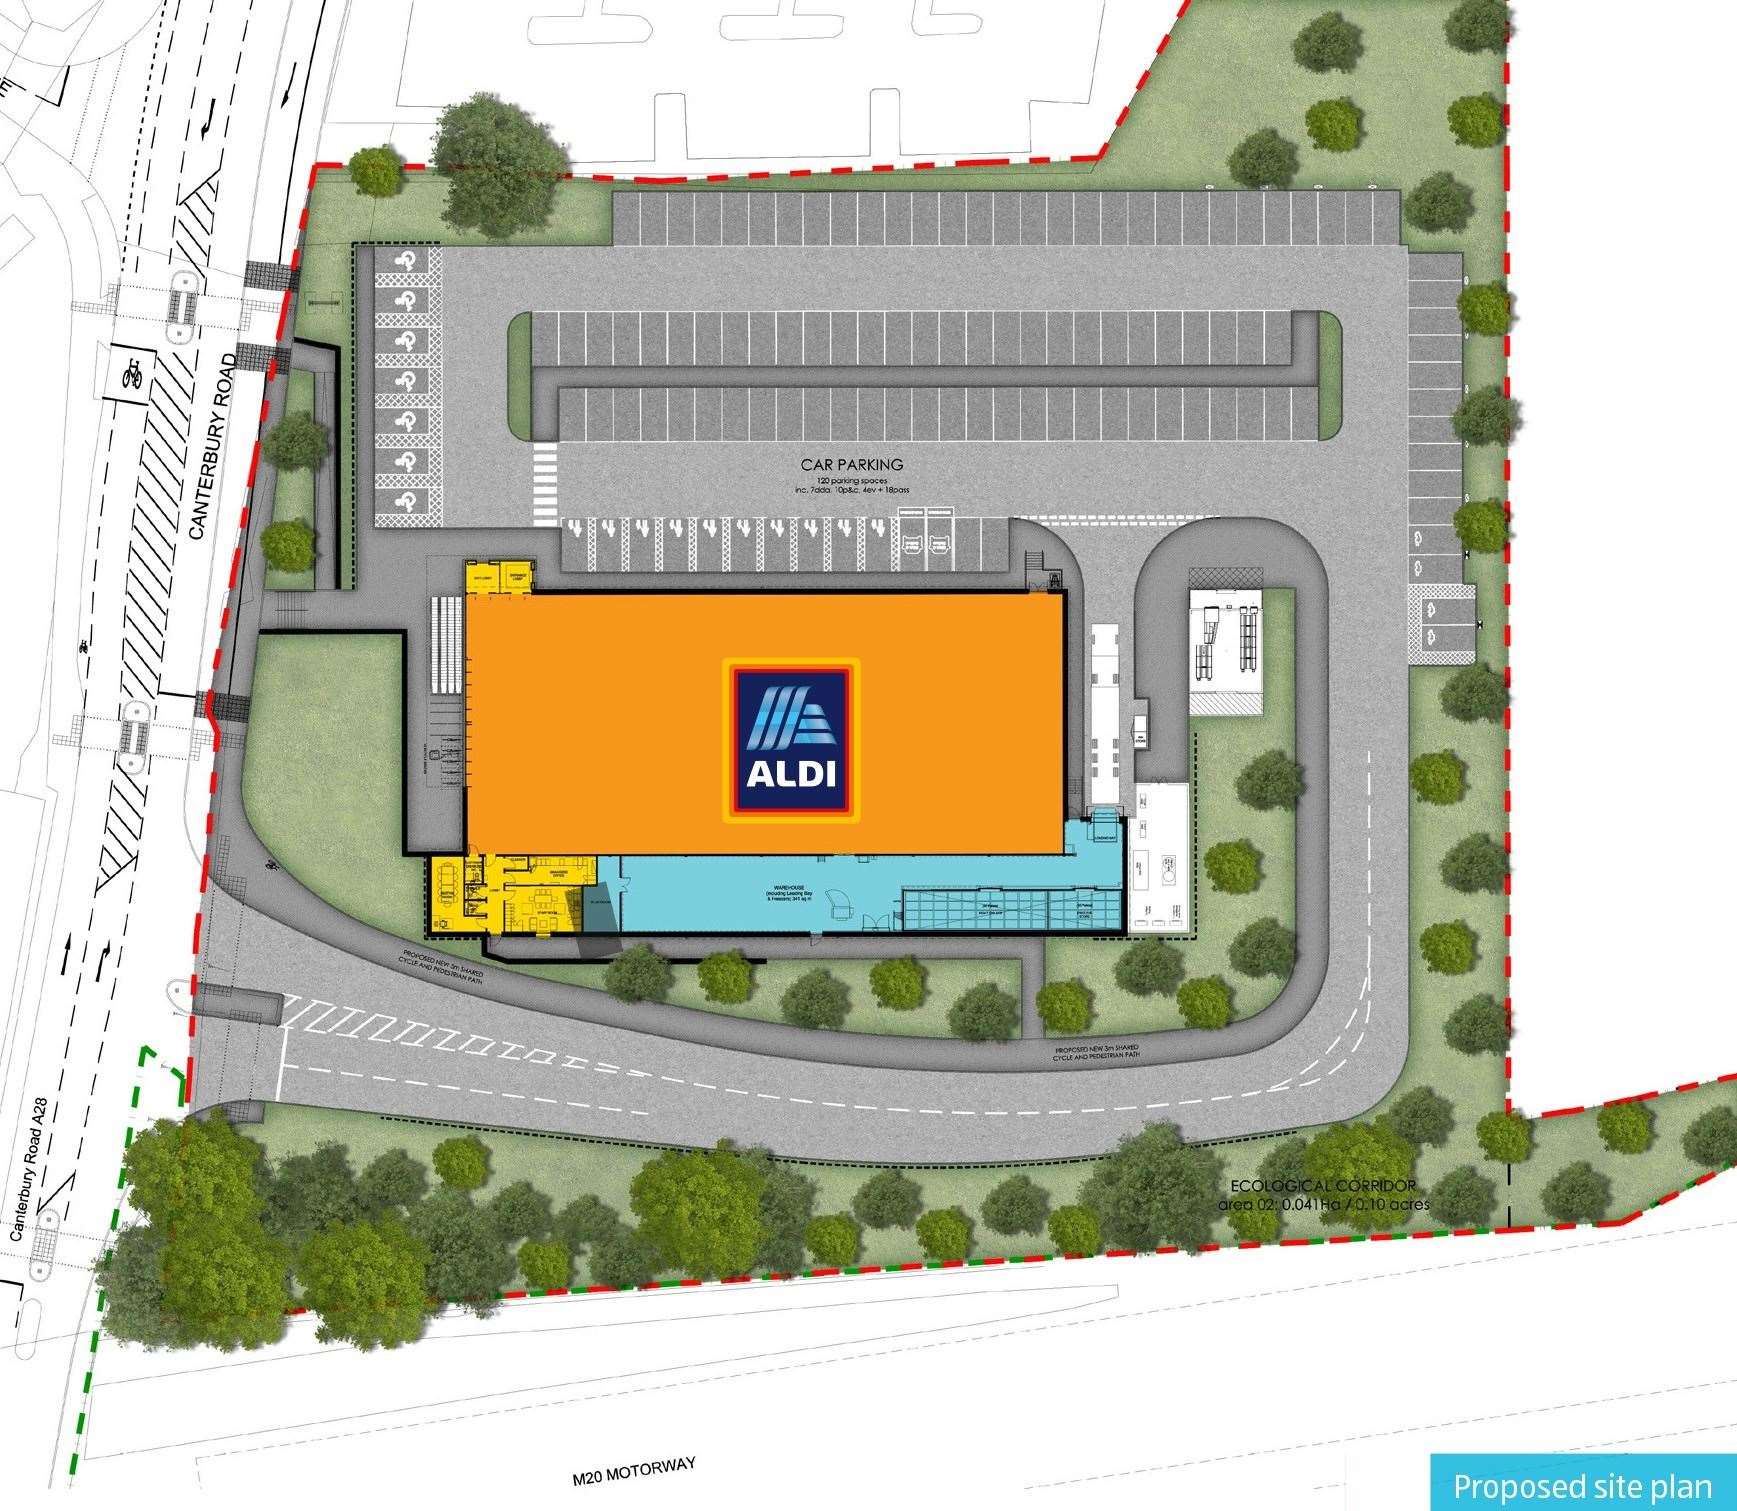 The planned layout of the Kennington store and car park